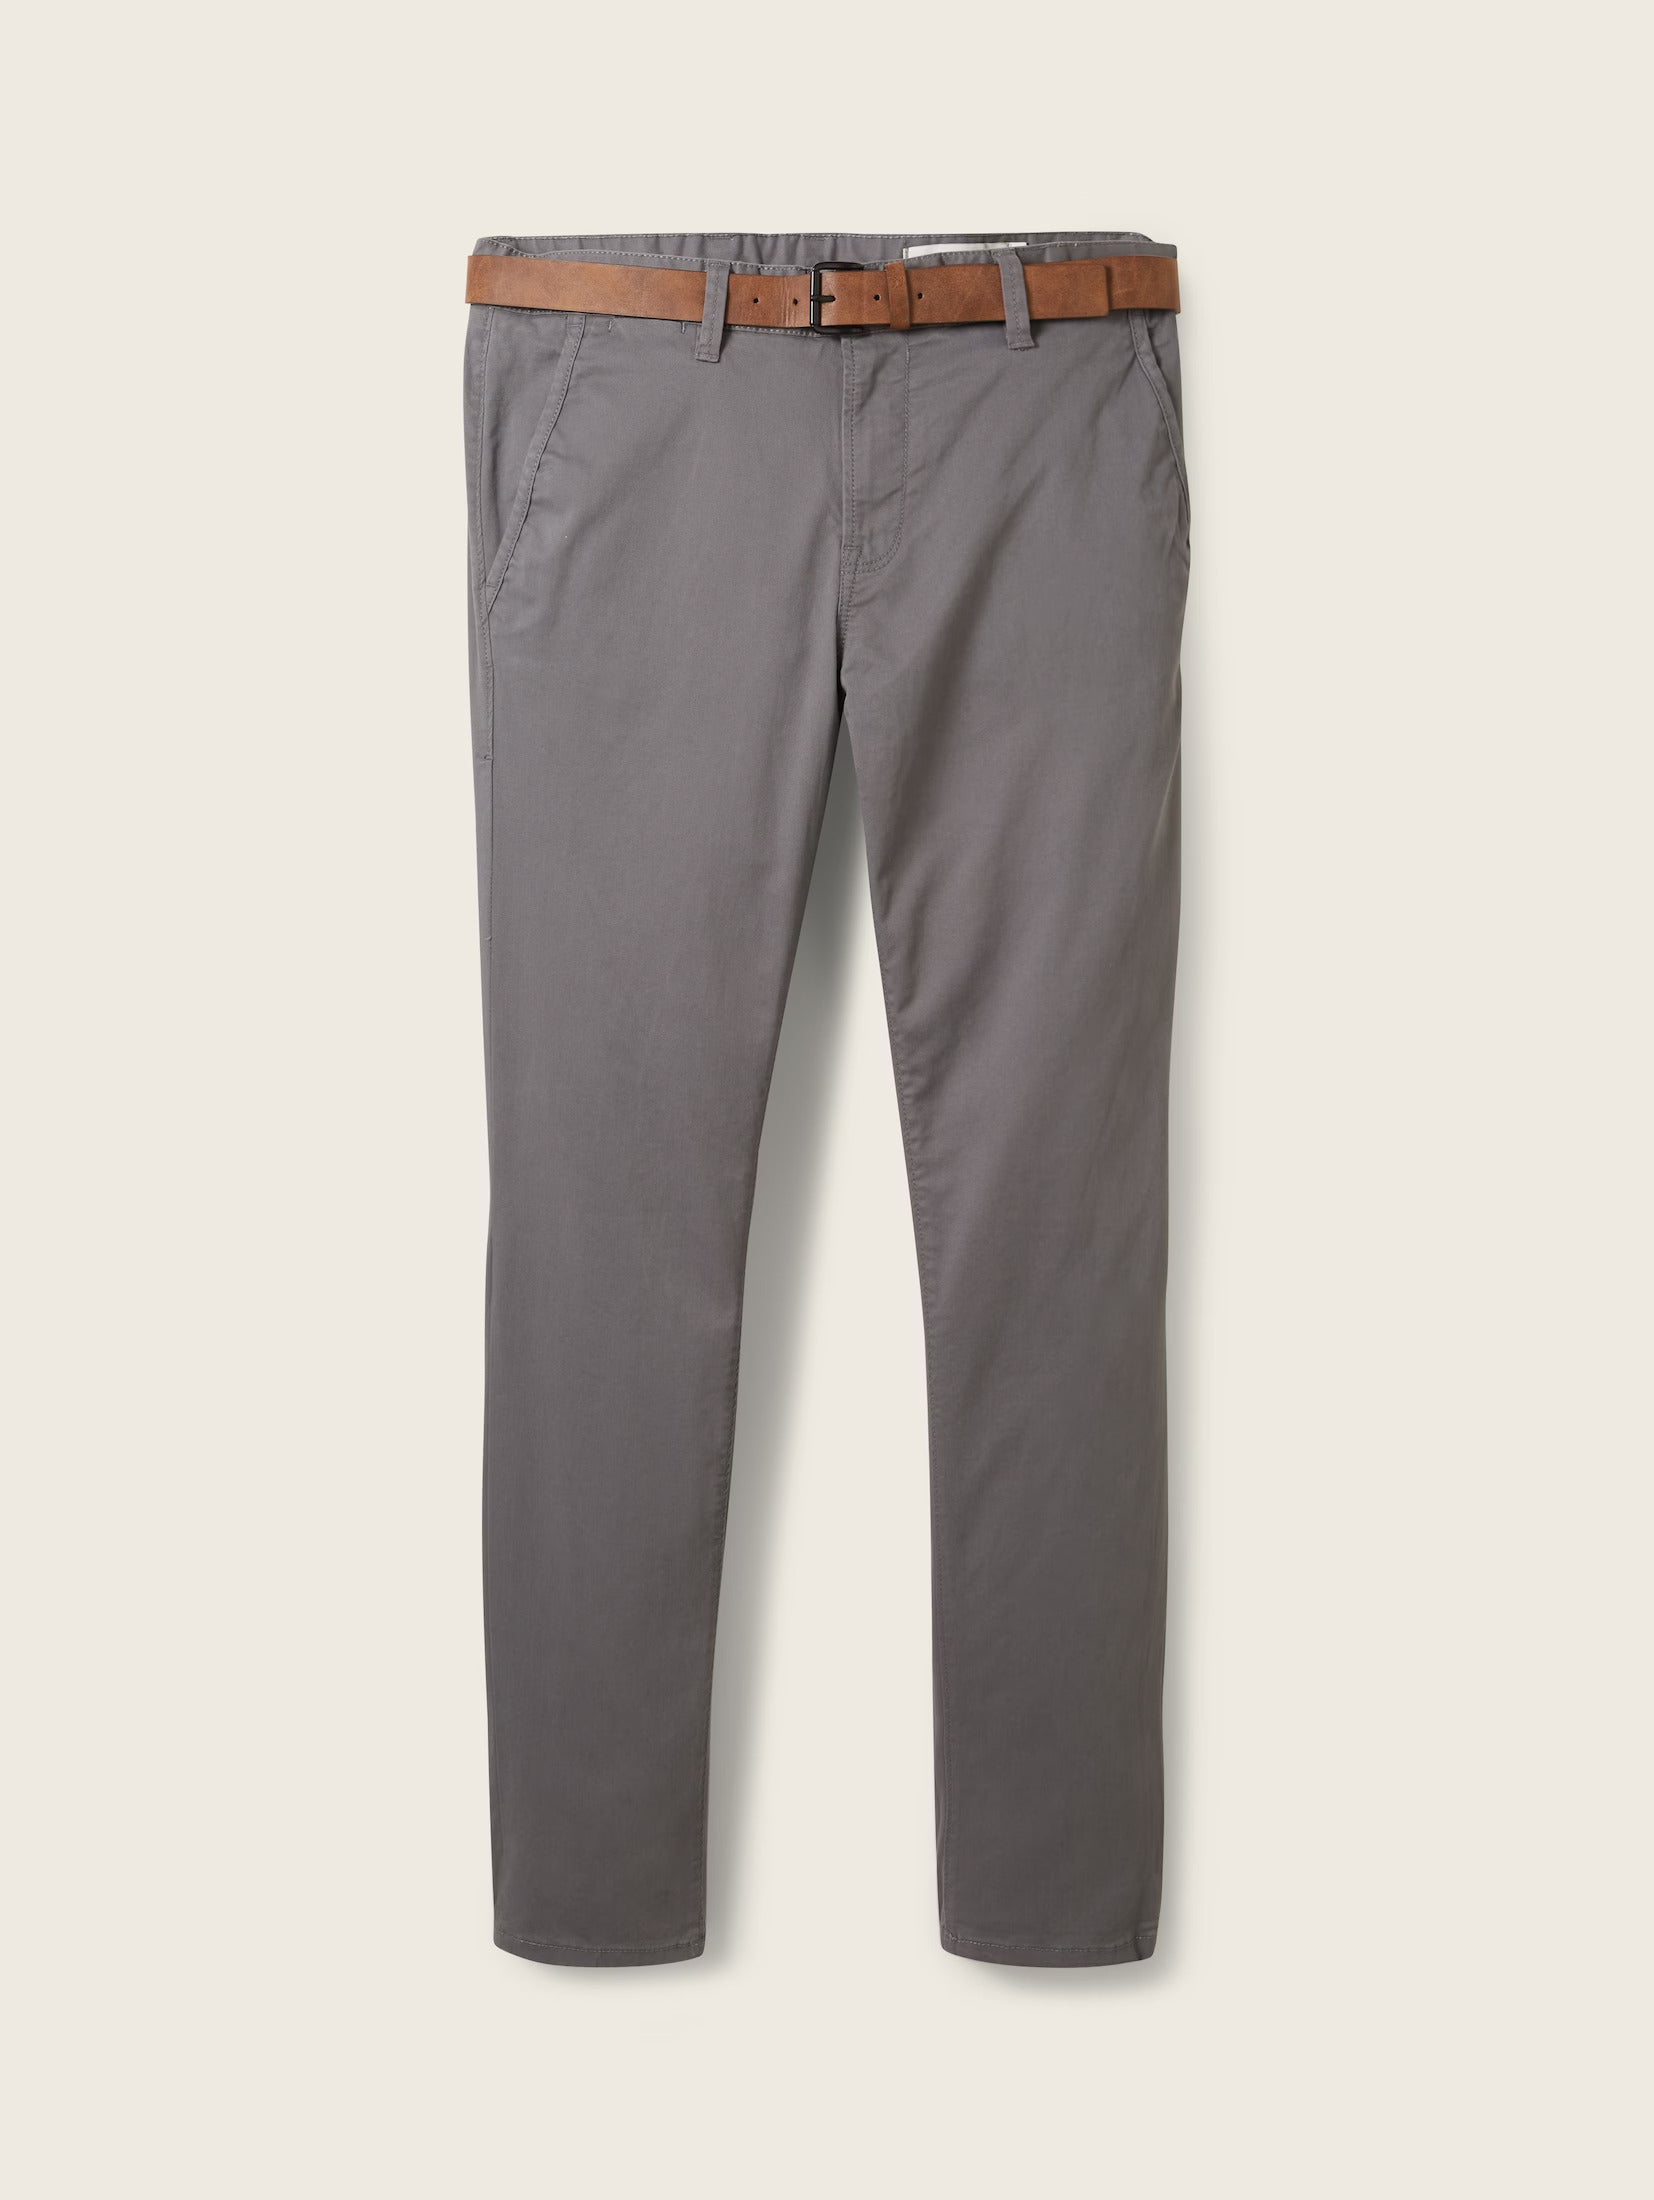 Tom Tailor Grey Chino With A Belt